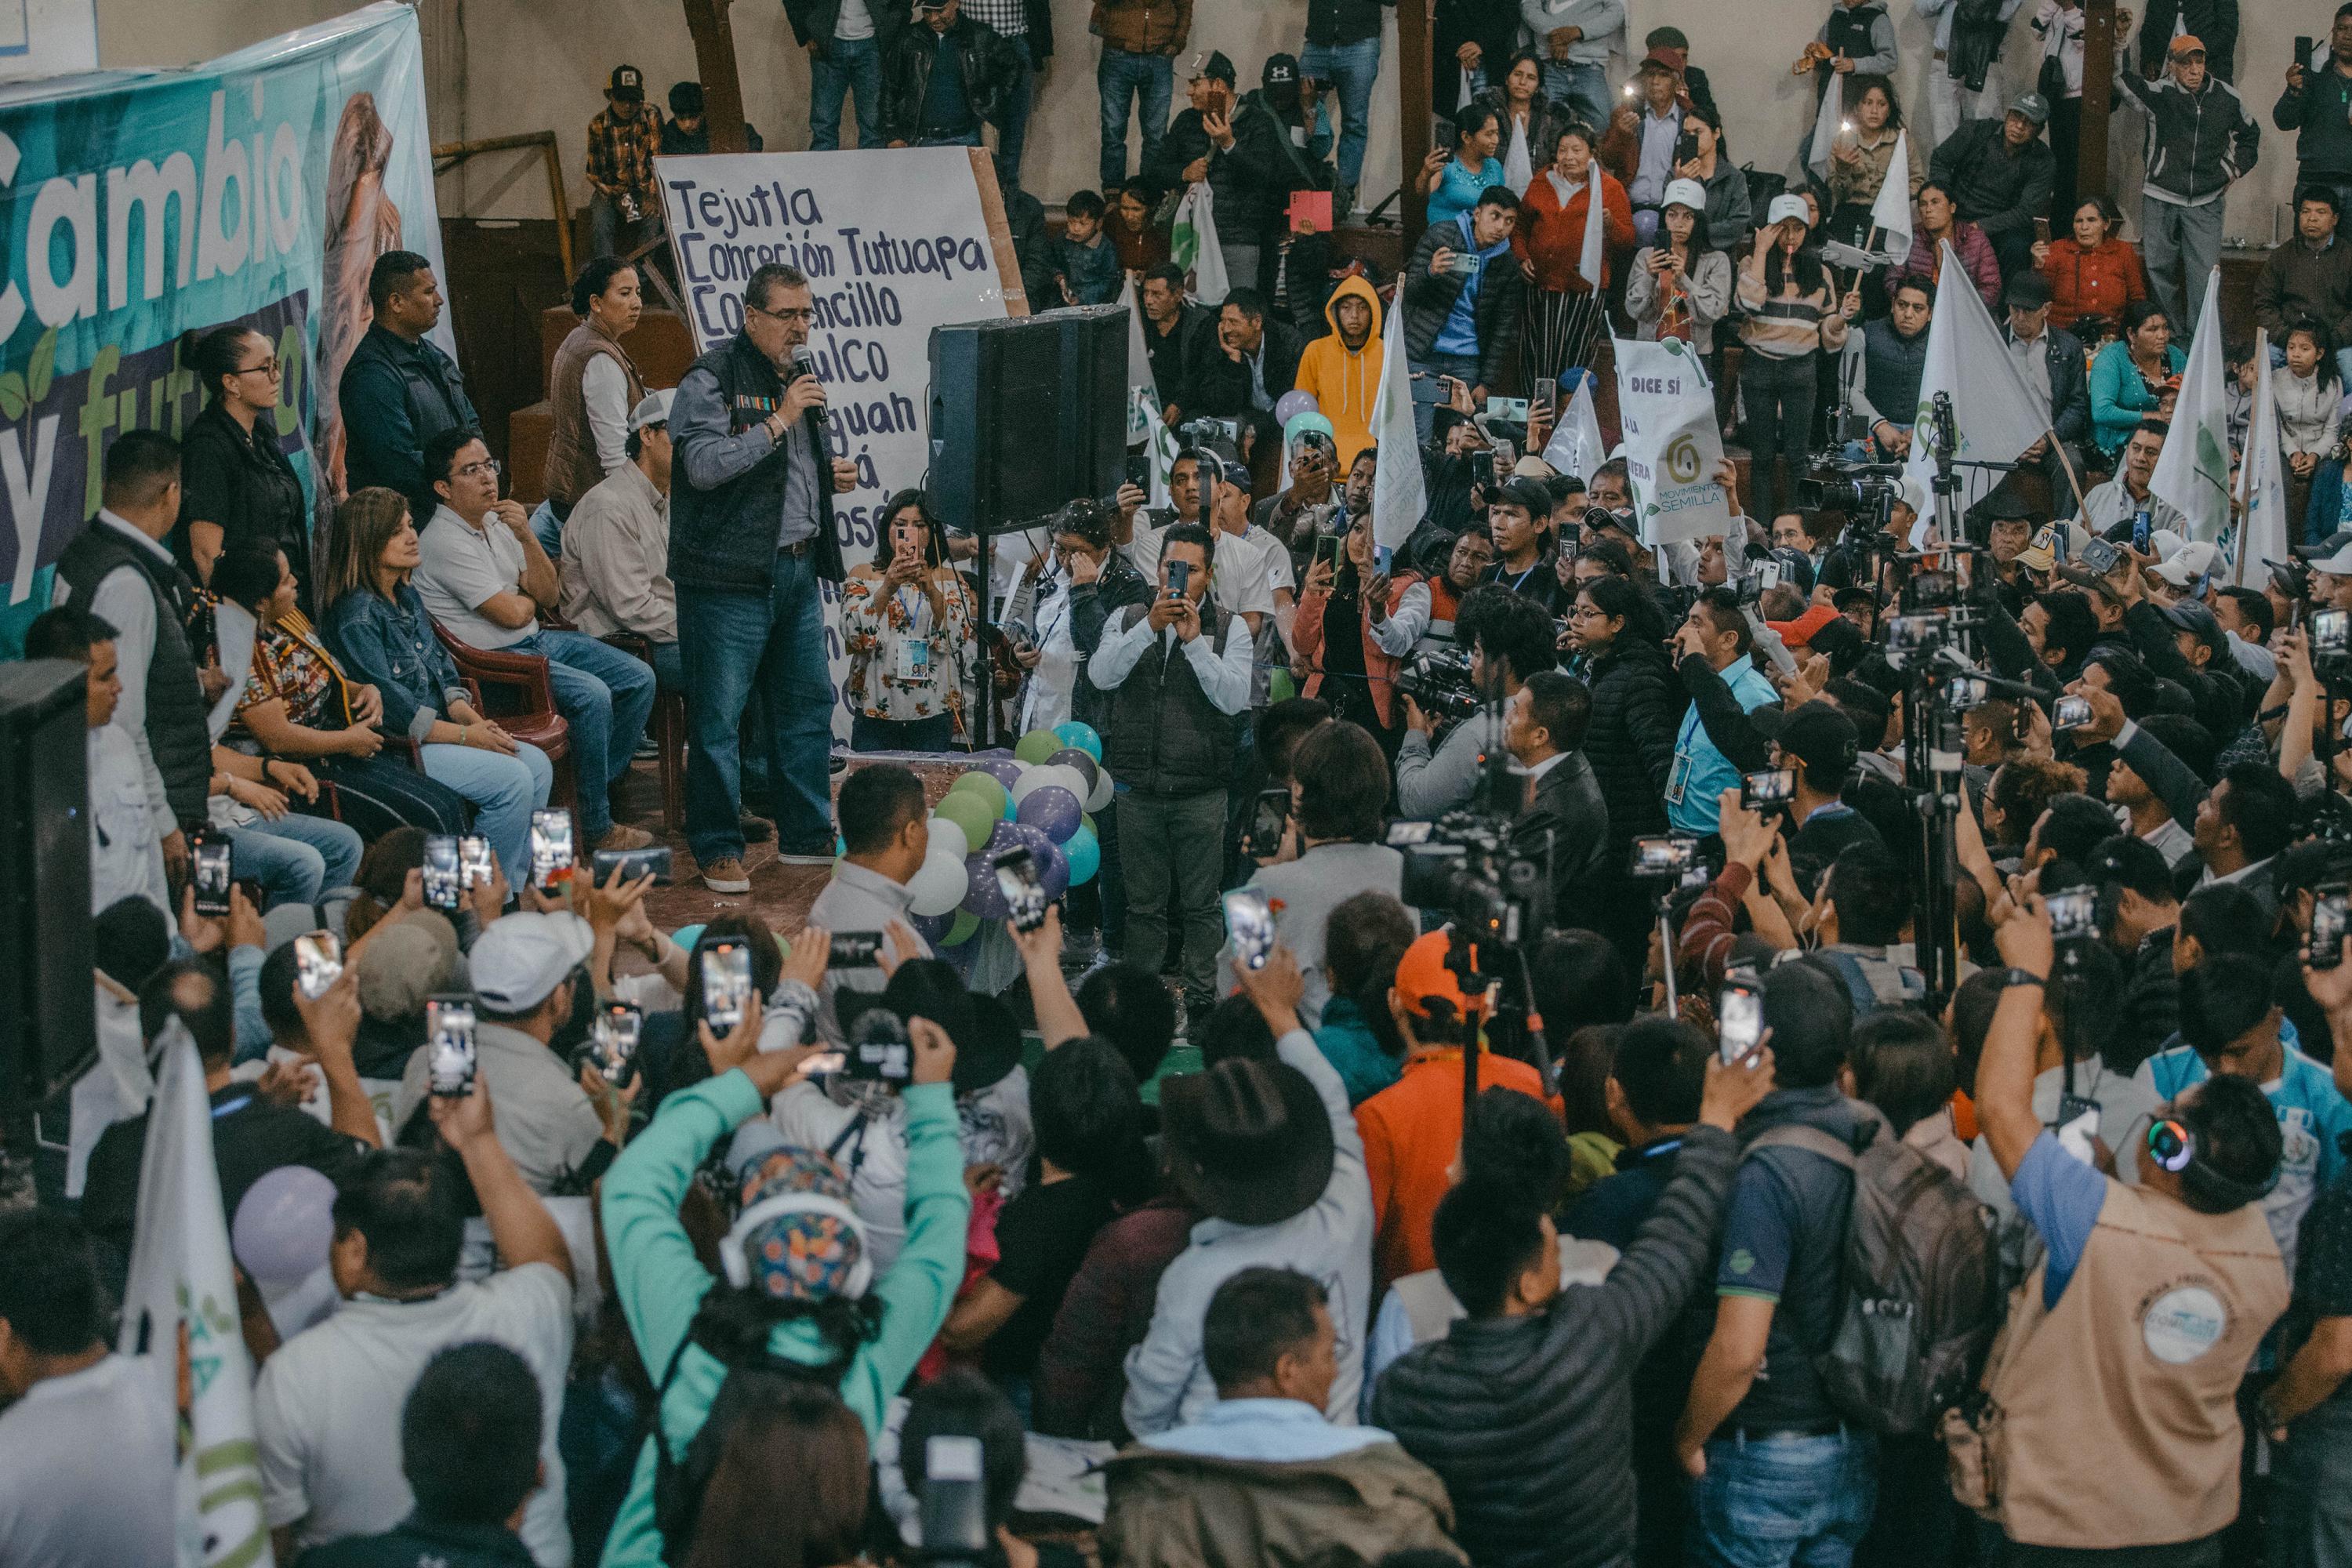 On the afternoon of August 12, Bernardo Arévalo held a rally attended by some 400 people in a municipal gymnasium in Tejutla, San Marcos. Many attendees praised the fact that Arévalo had arrived there by car, not by helicopter, as candidates visiting the country’s more rural and mountainous areas have historically done.